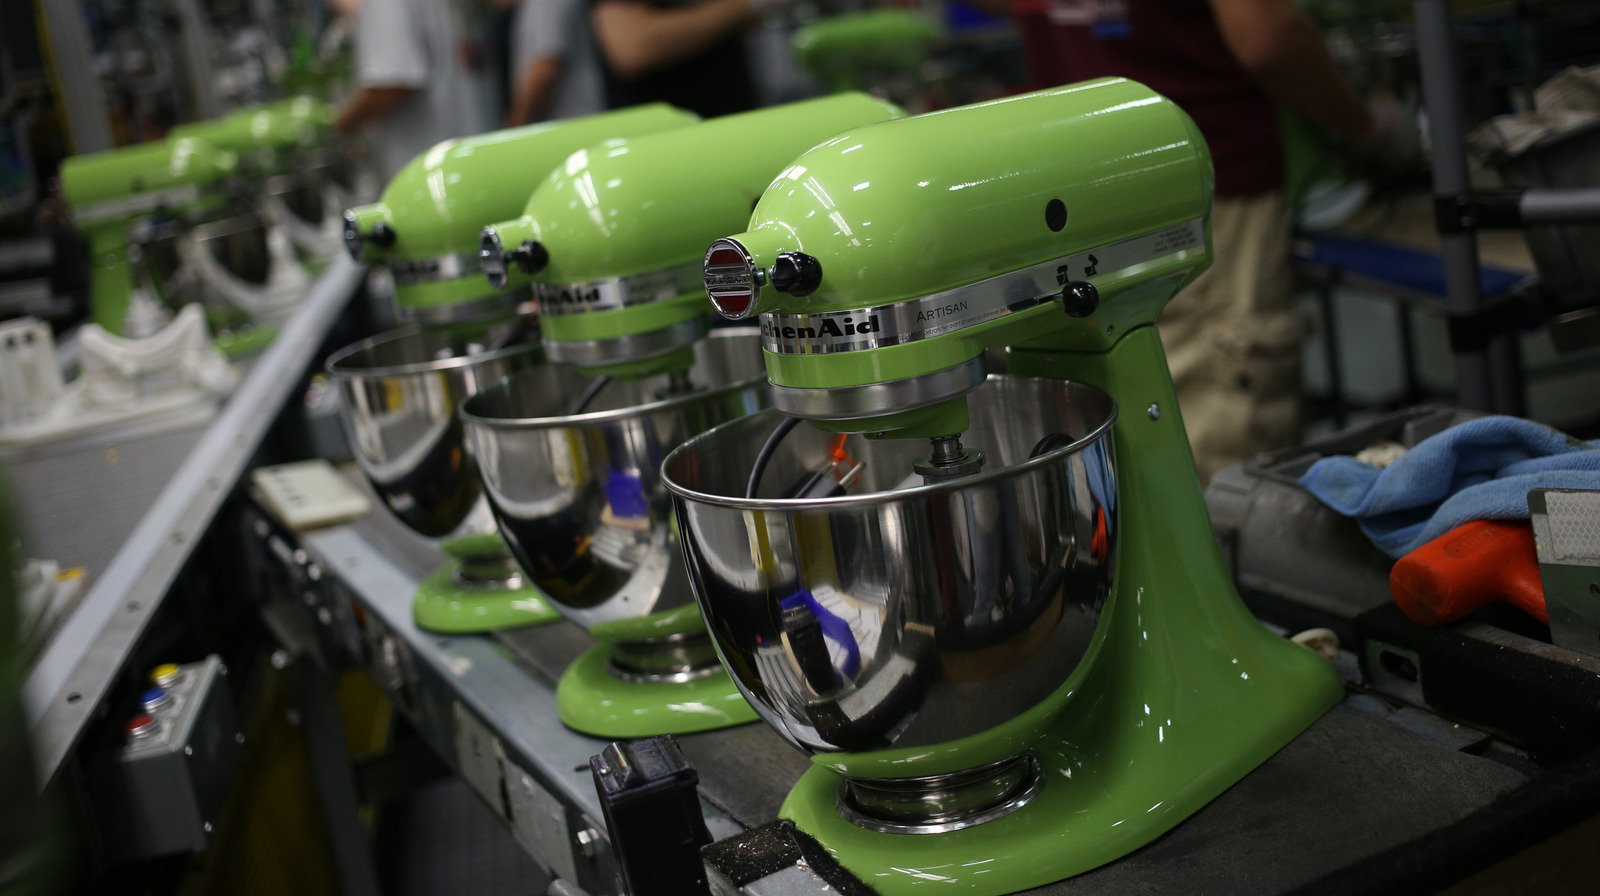 KitchenAid vs Bosch Mixer: Which Mixer is Best for You?